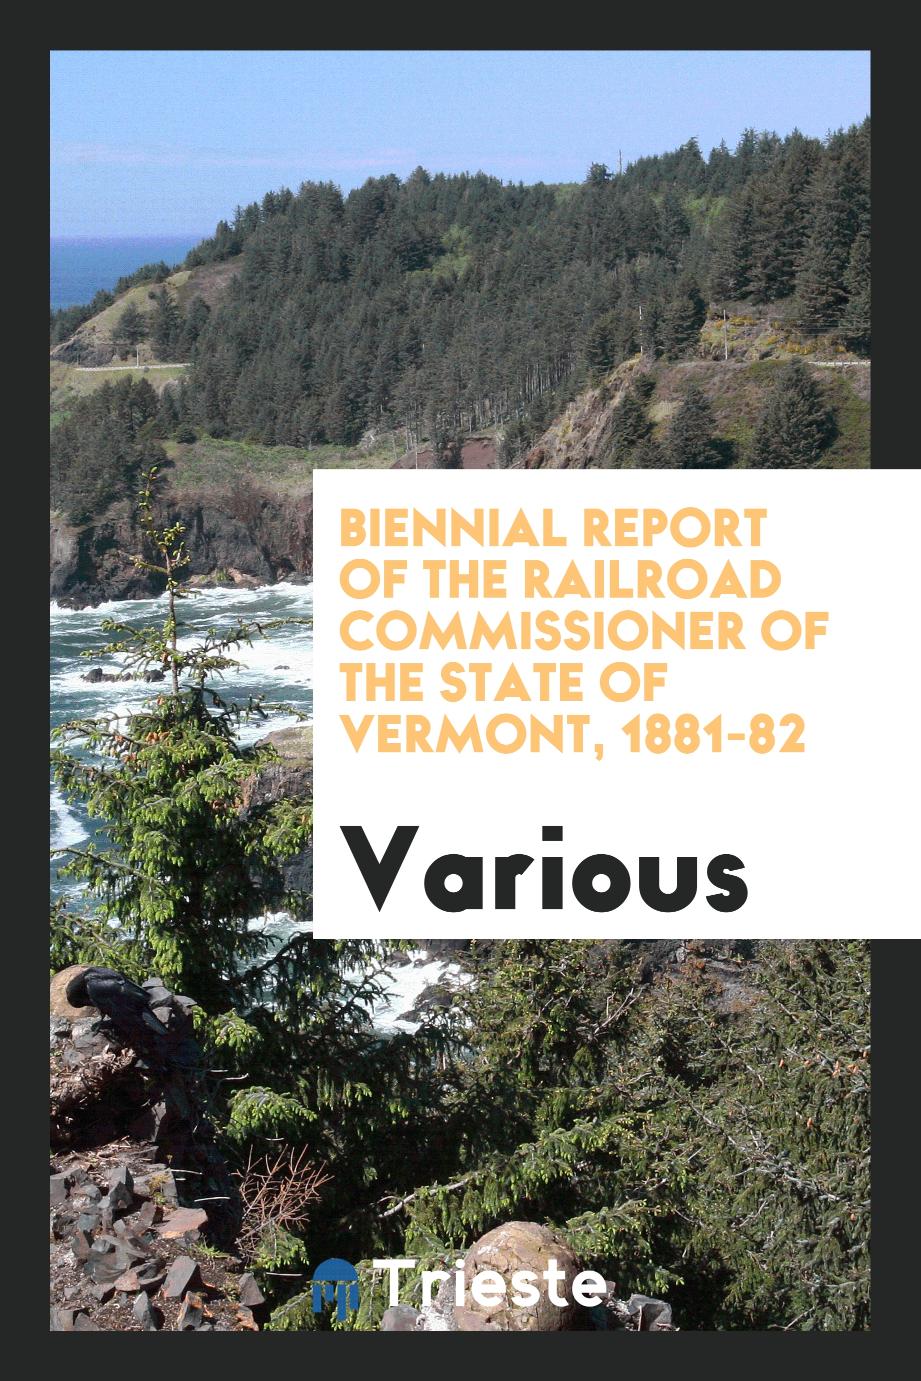 Biennial Report of the Railroad Commissioner of the State of Vermont, 1881-82